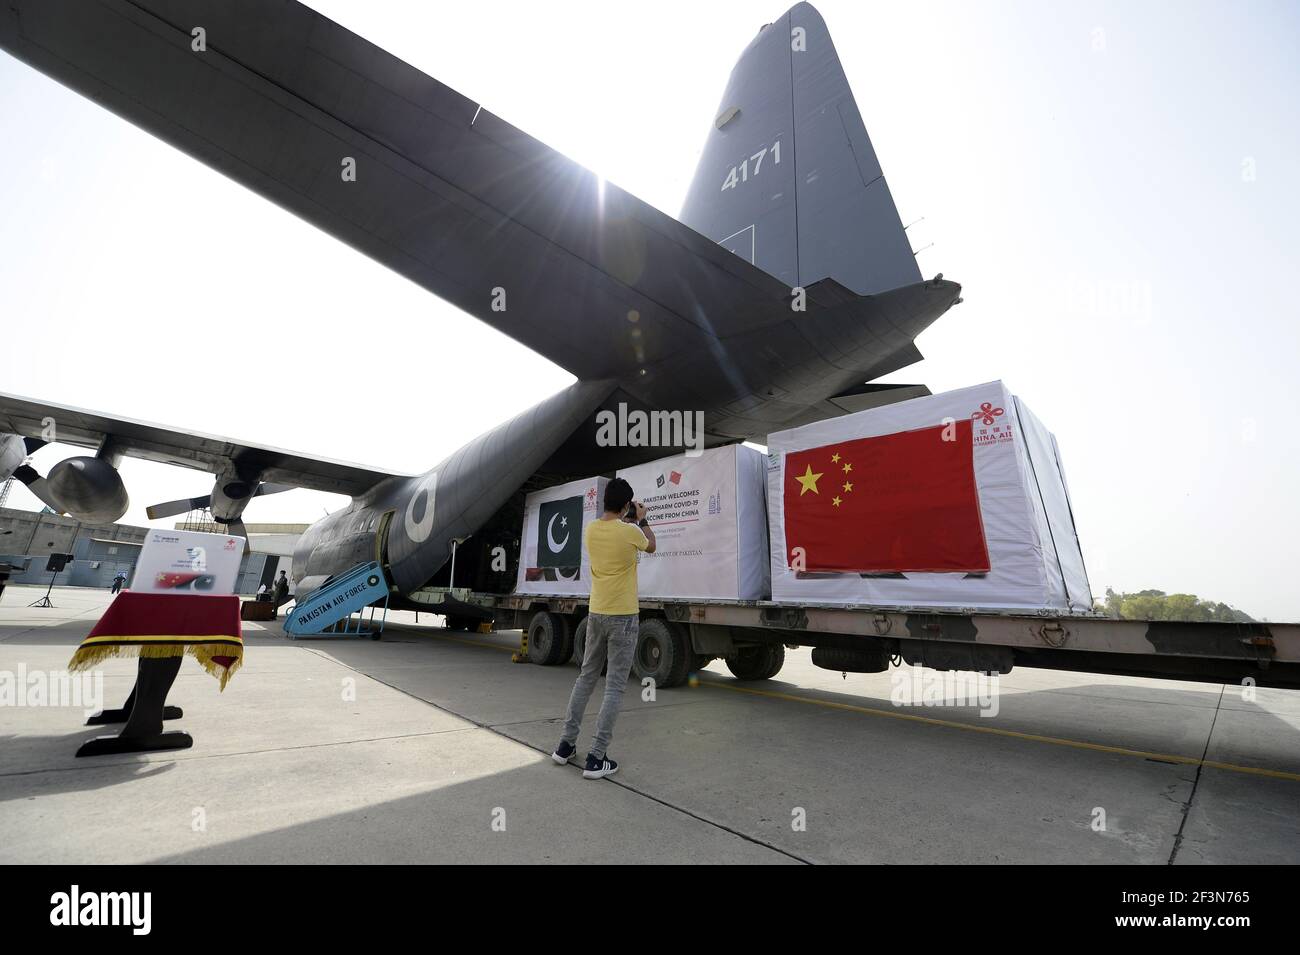 (210317) -- ISLAMABAD, March 17, 2021 (Xinhua) -- A handover ceremony is held for the second batch of COVID-19 vaccines donated by the Chinese government at Noor Khan Air Base near Islamabad, capital of Pakistan, March 17, 2021. (Xinhua/Ahmad Kamal) Stock Photo